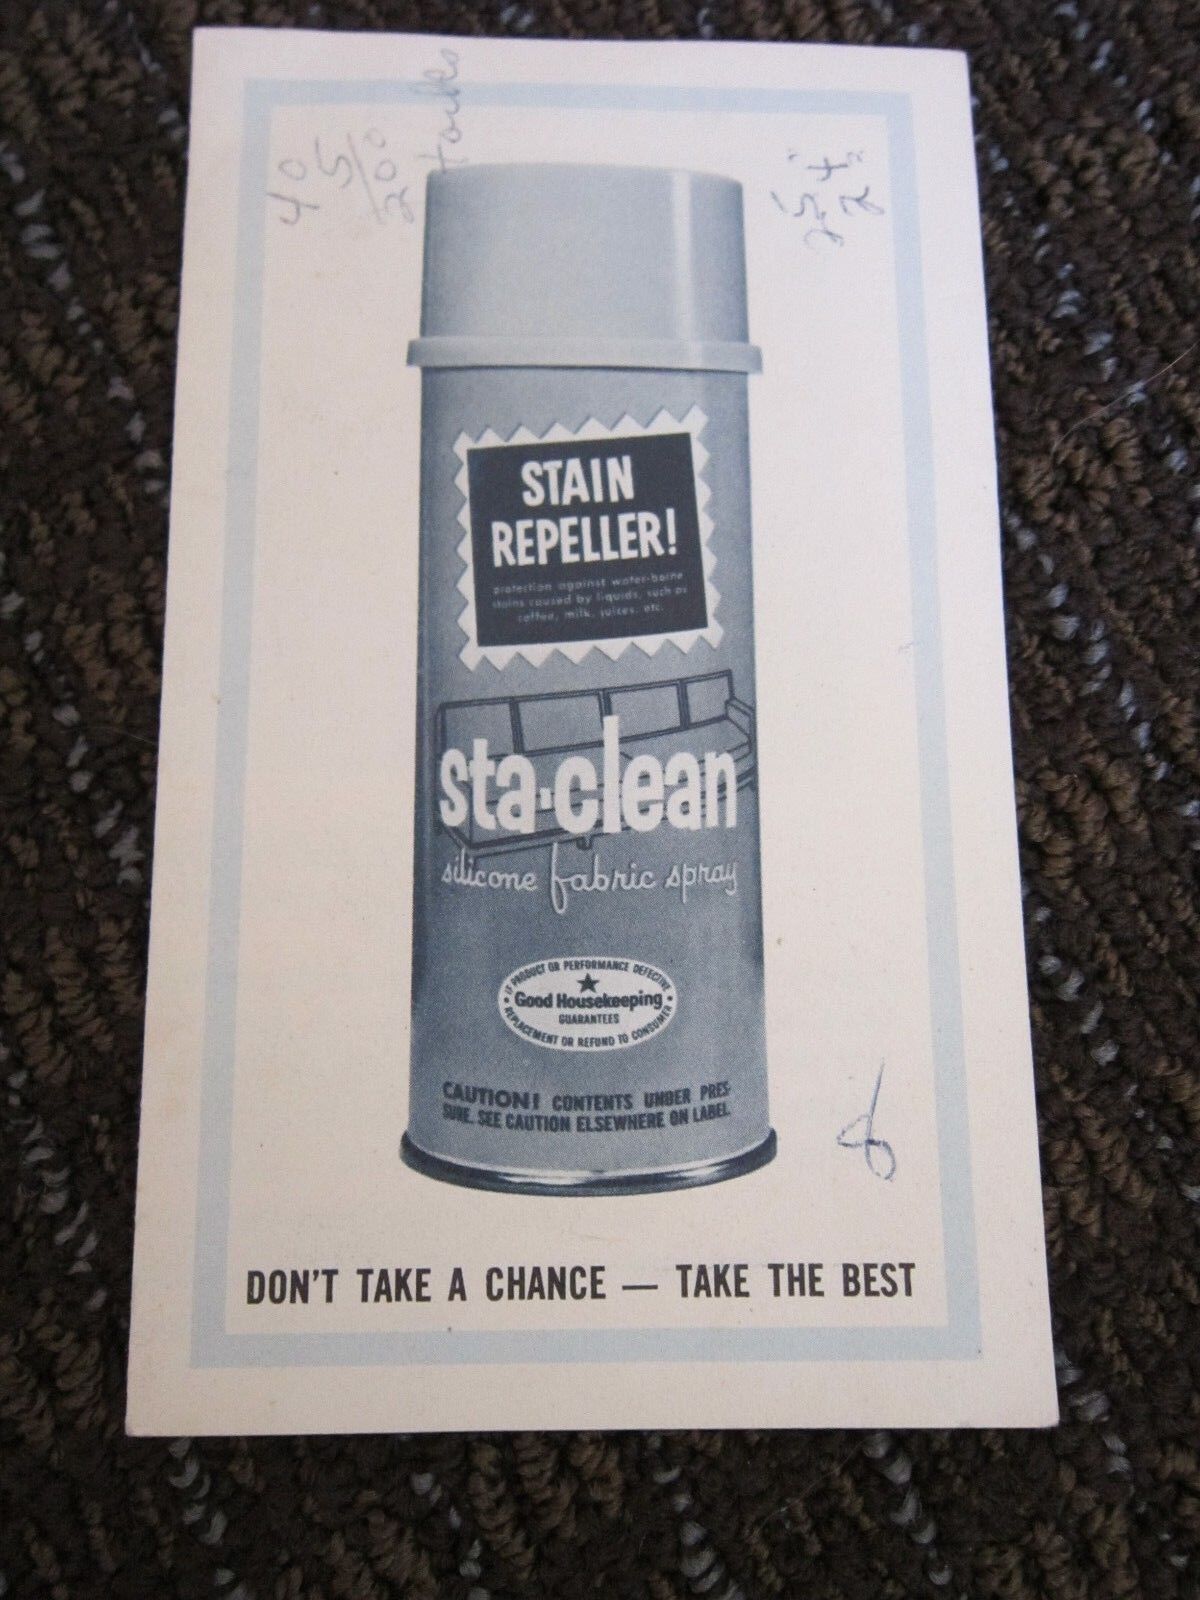 Sta-clean Stain Repeller AD Brochure Upholstery 1 page Vintage Good Housekeeping